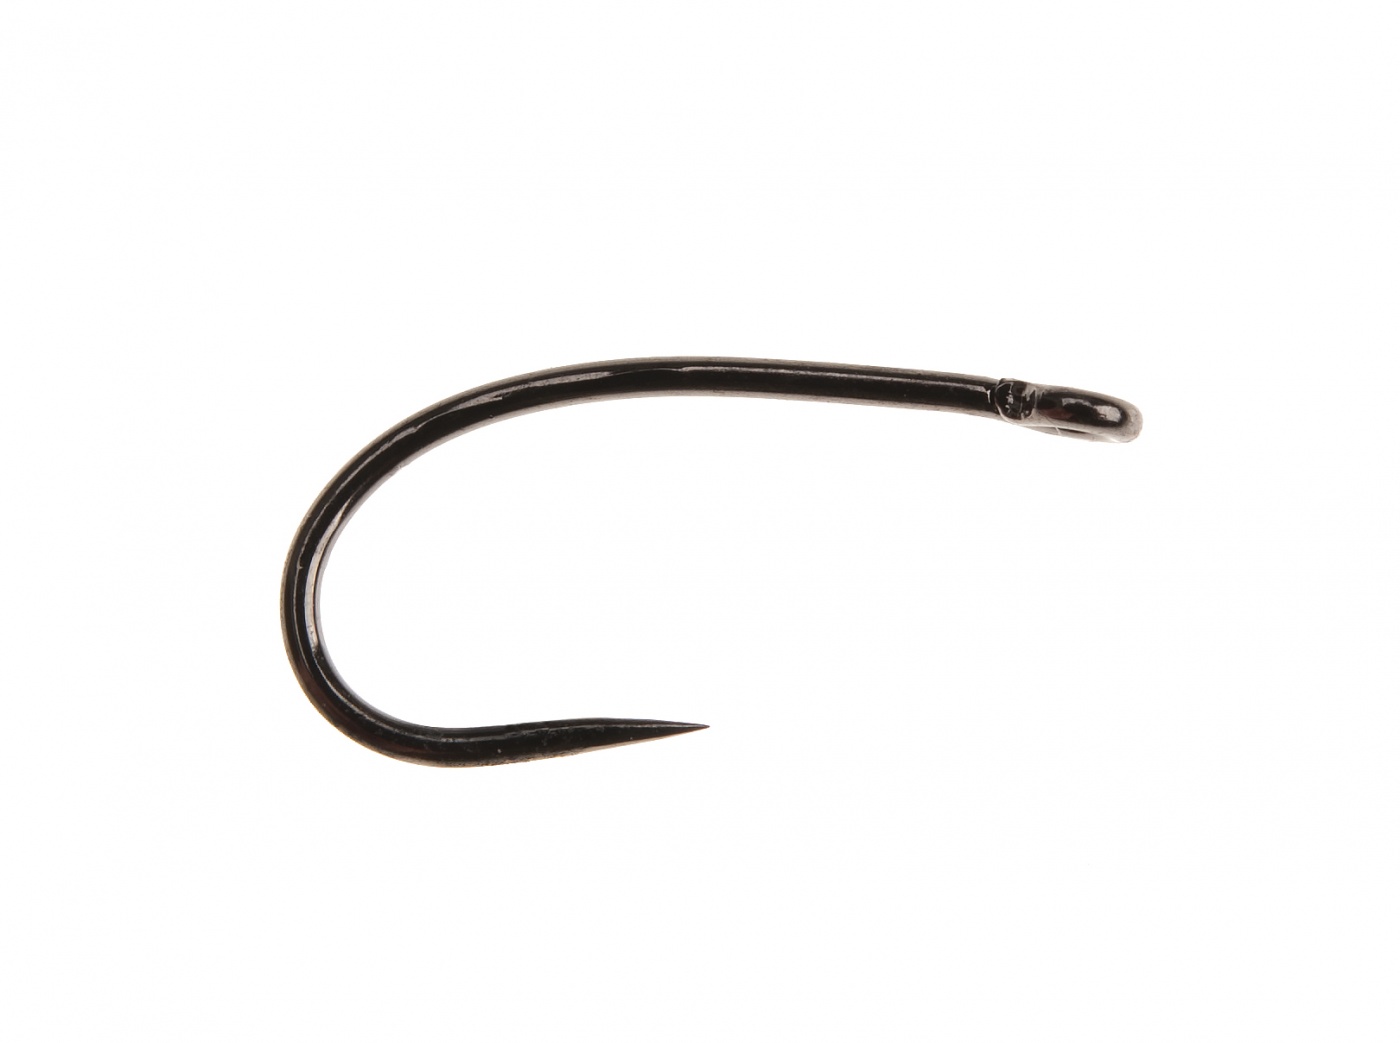 Ahrex Fw511 Curved Dry Hook Barbless #16 Trout Fly Tying Hooks